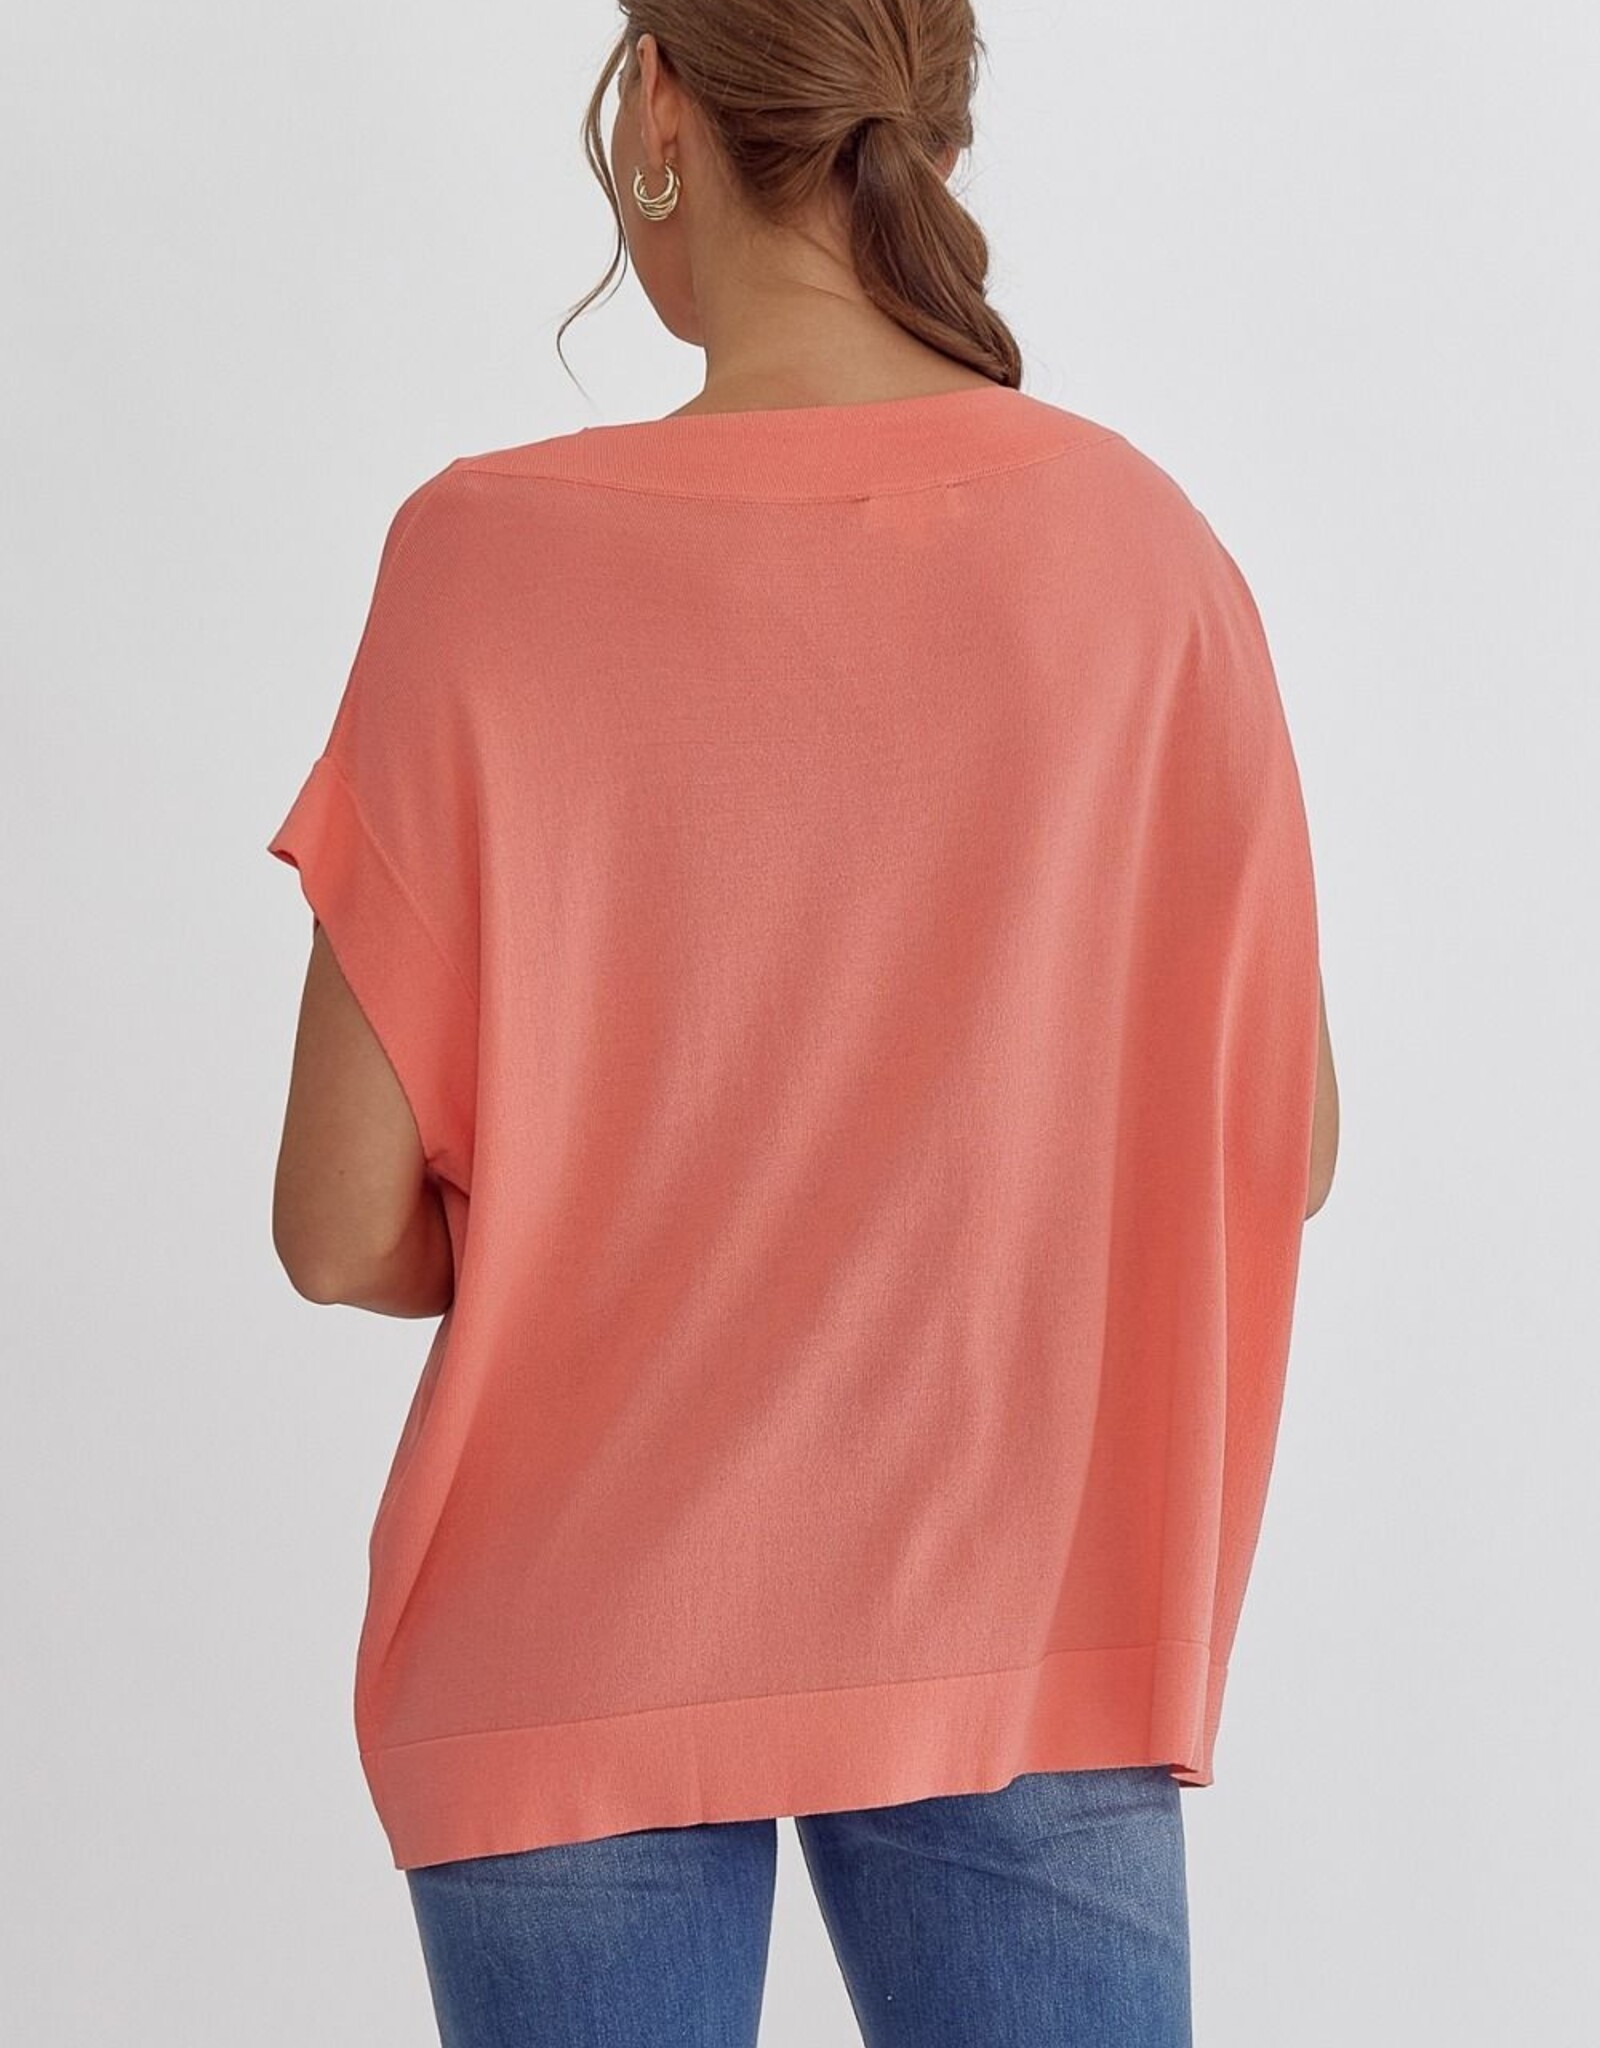 Solid Boat Neck Top w/ Dolman Sleeve